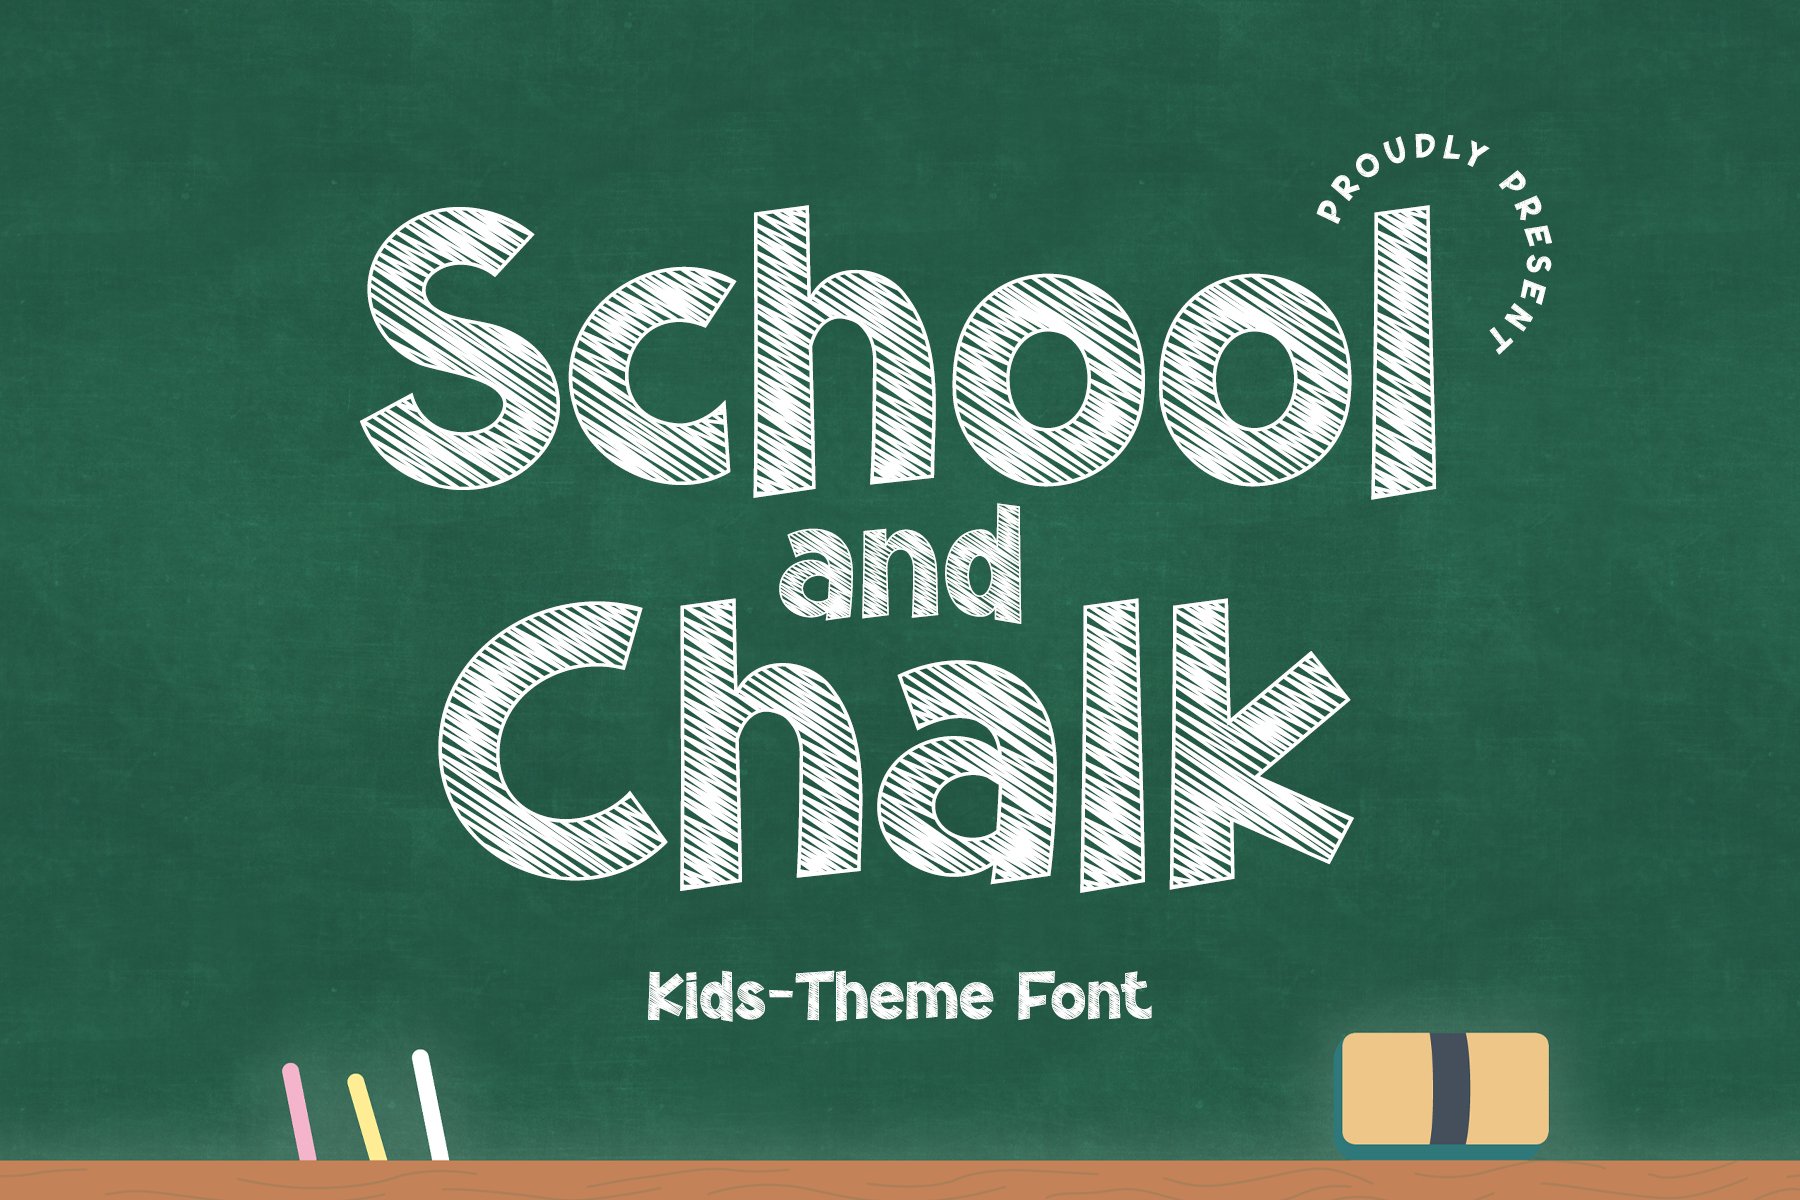 School and Chalk - Kids Font cover image.